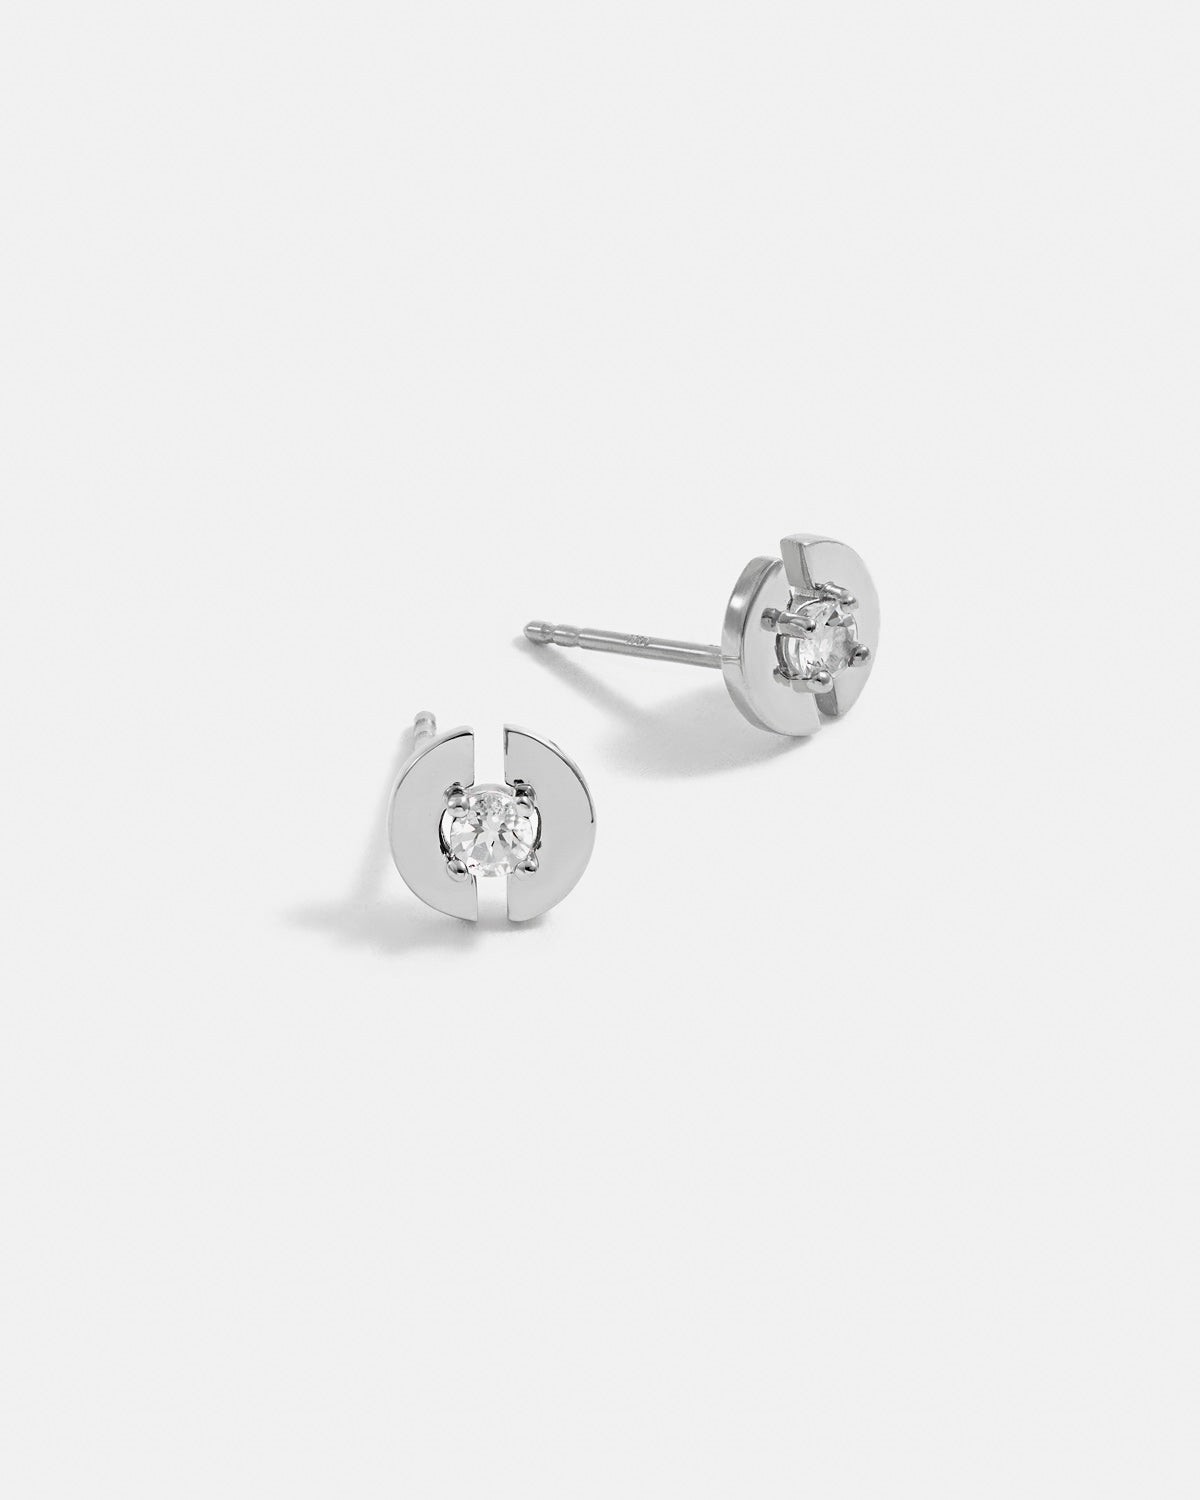 Stein Stud Earrings in Silver with White Quartz